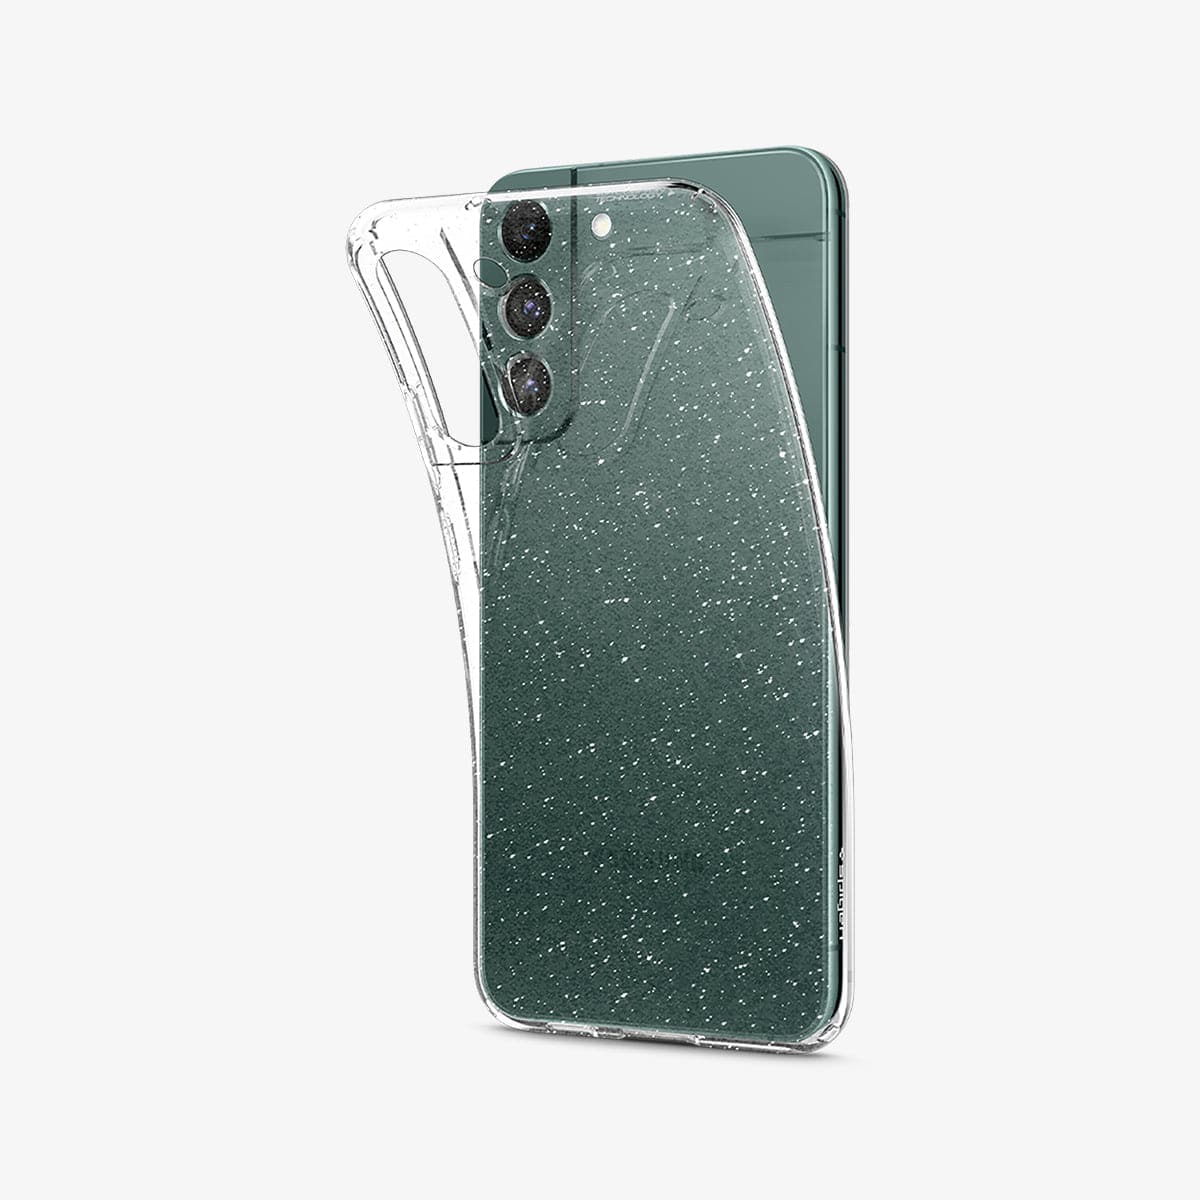 ACS03951 - Galaxy S22 Plus 5G Case Liquid Crystal Glitter in crystal quartz showing the back with case bending away from device to show the flexibility